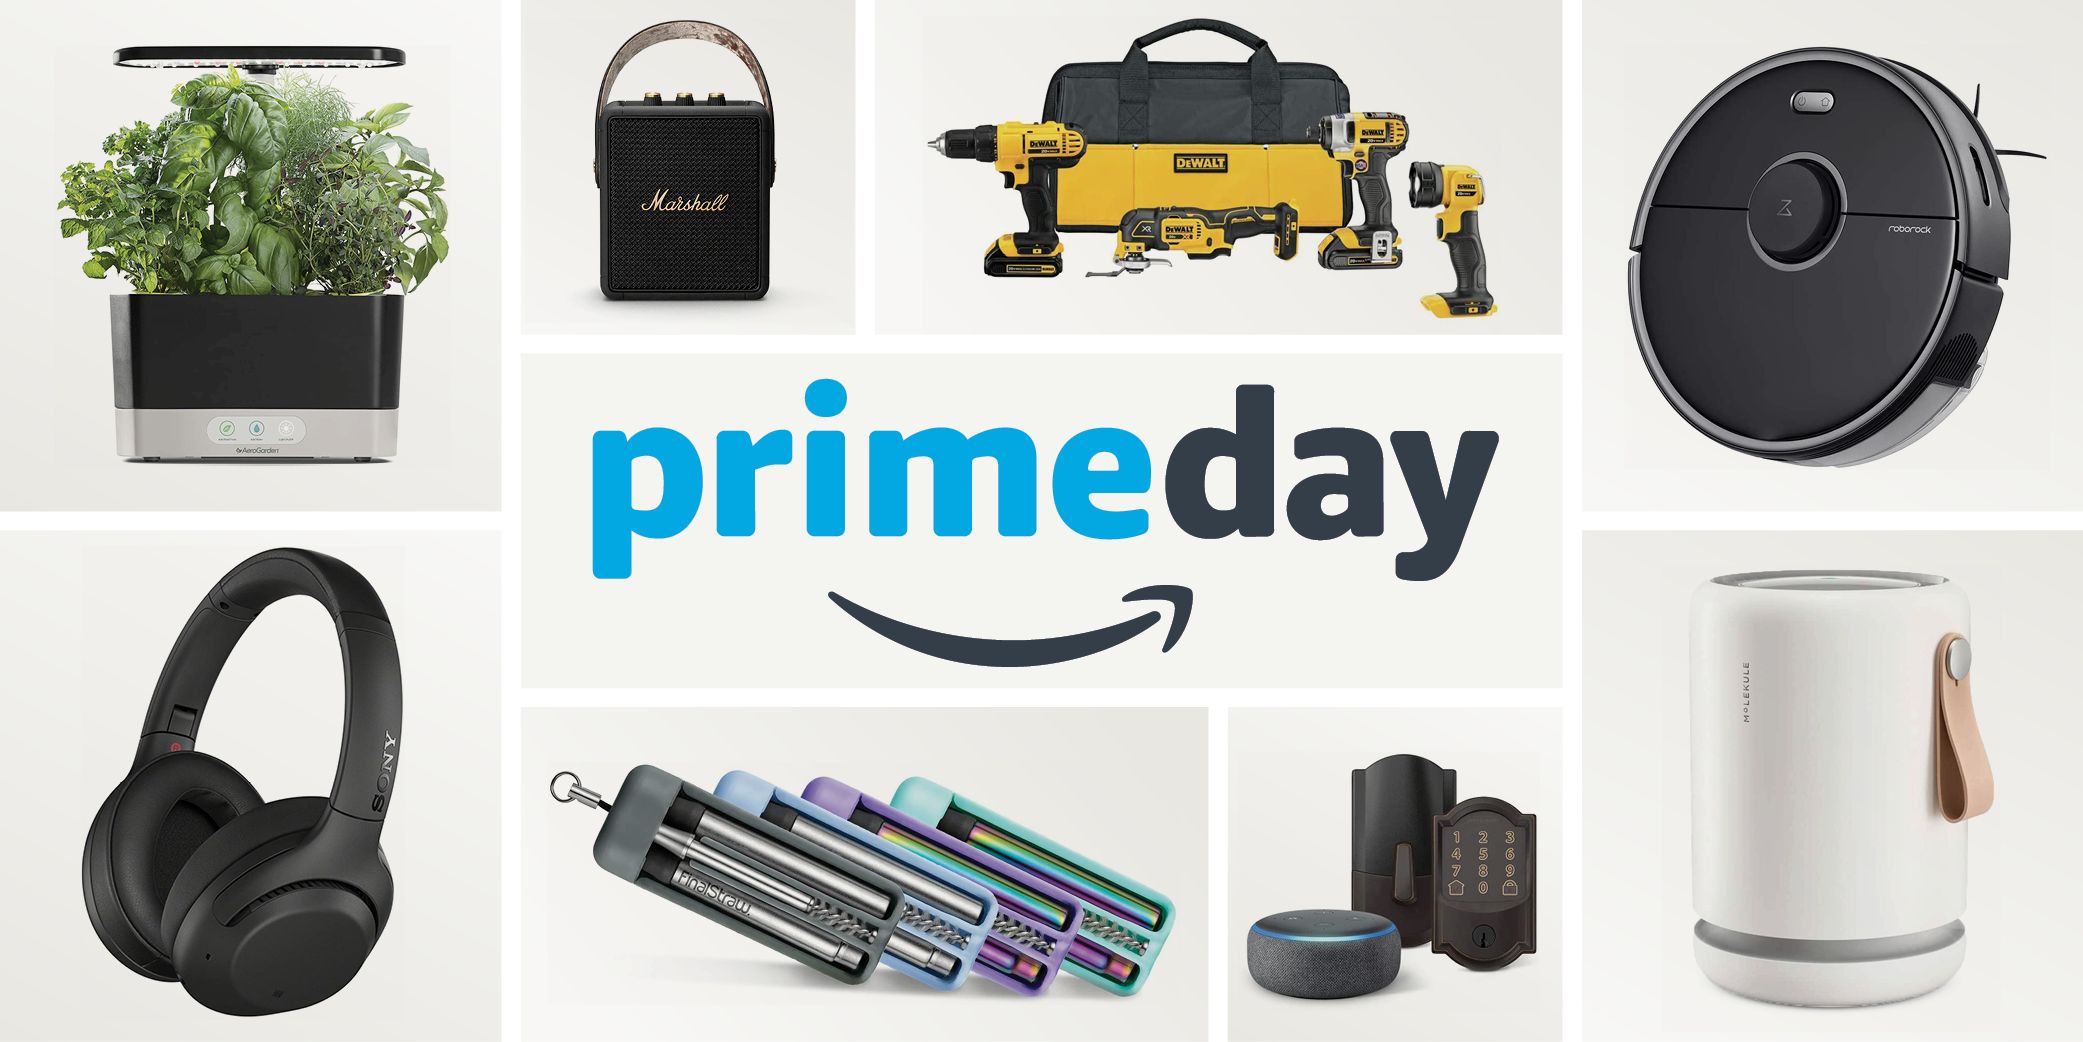 ring 14 piece security system prime day